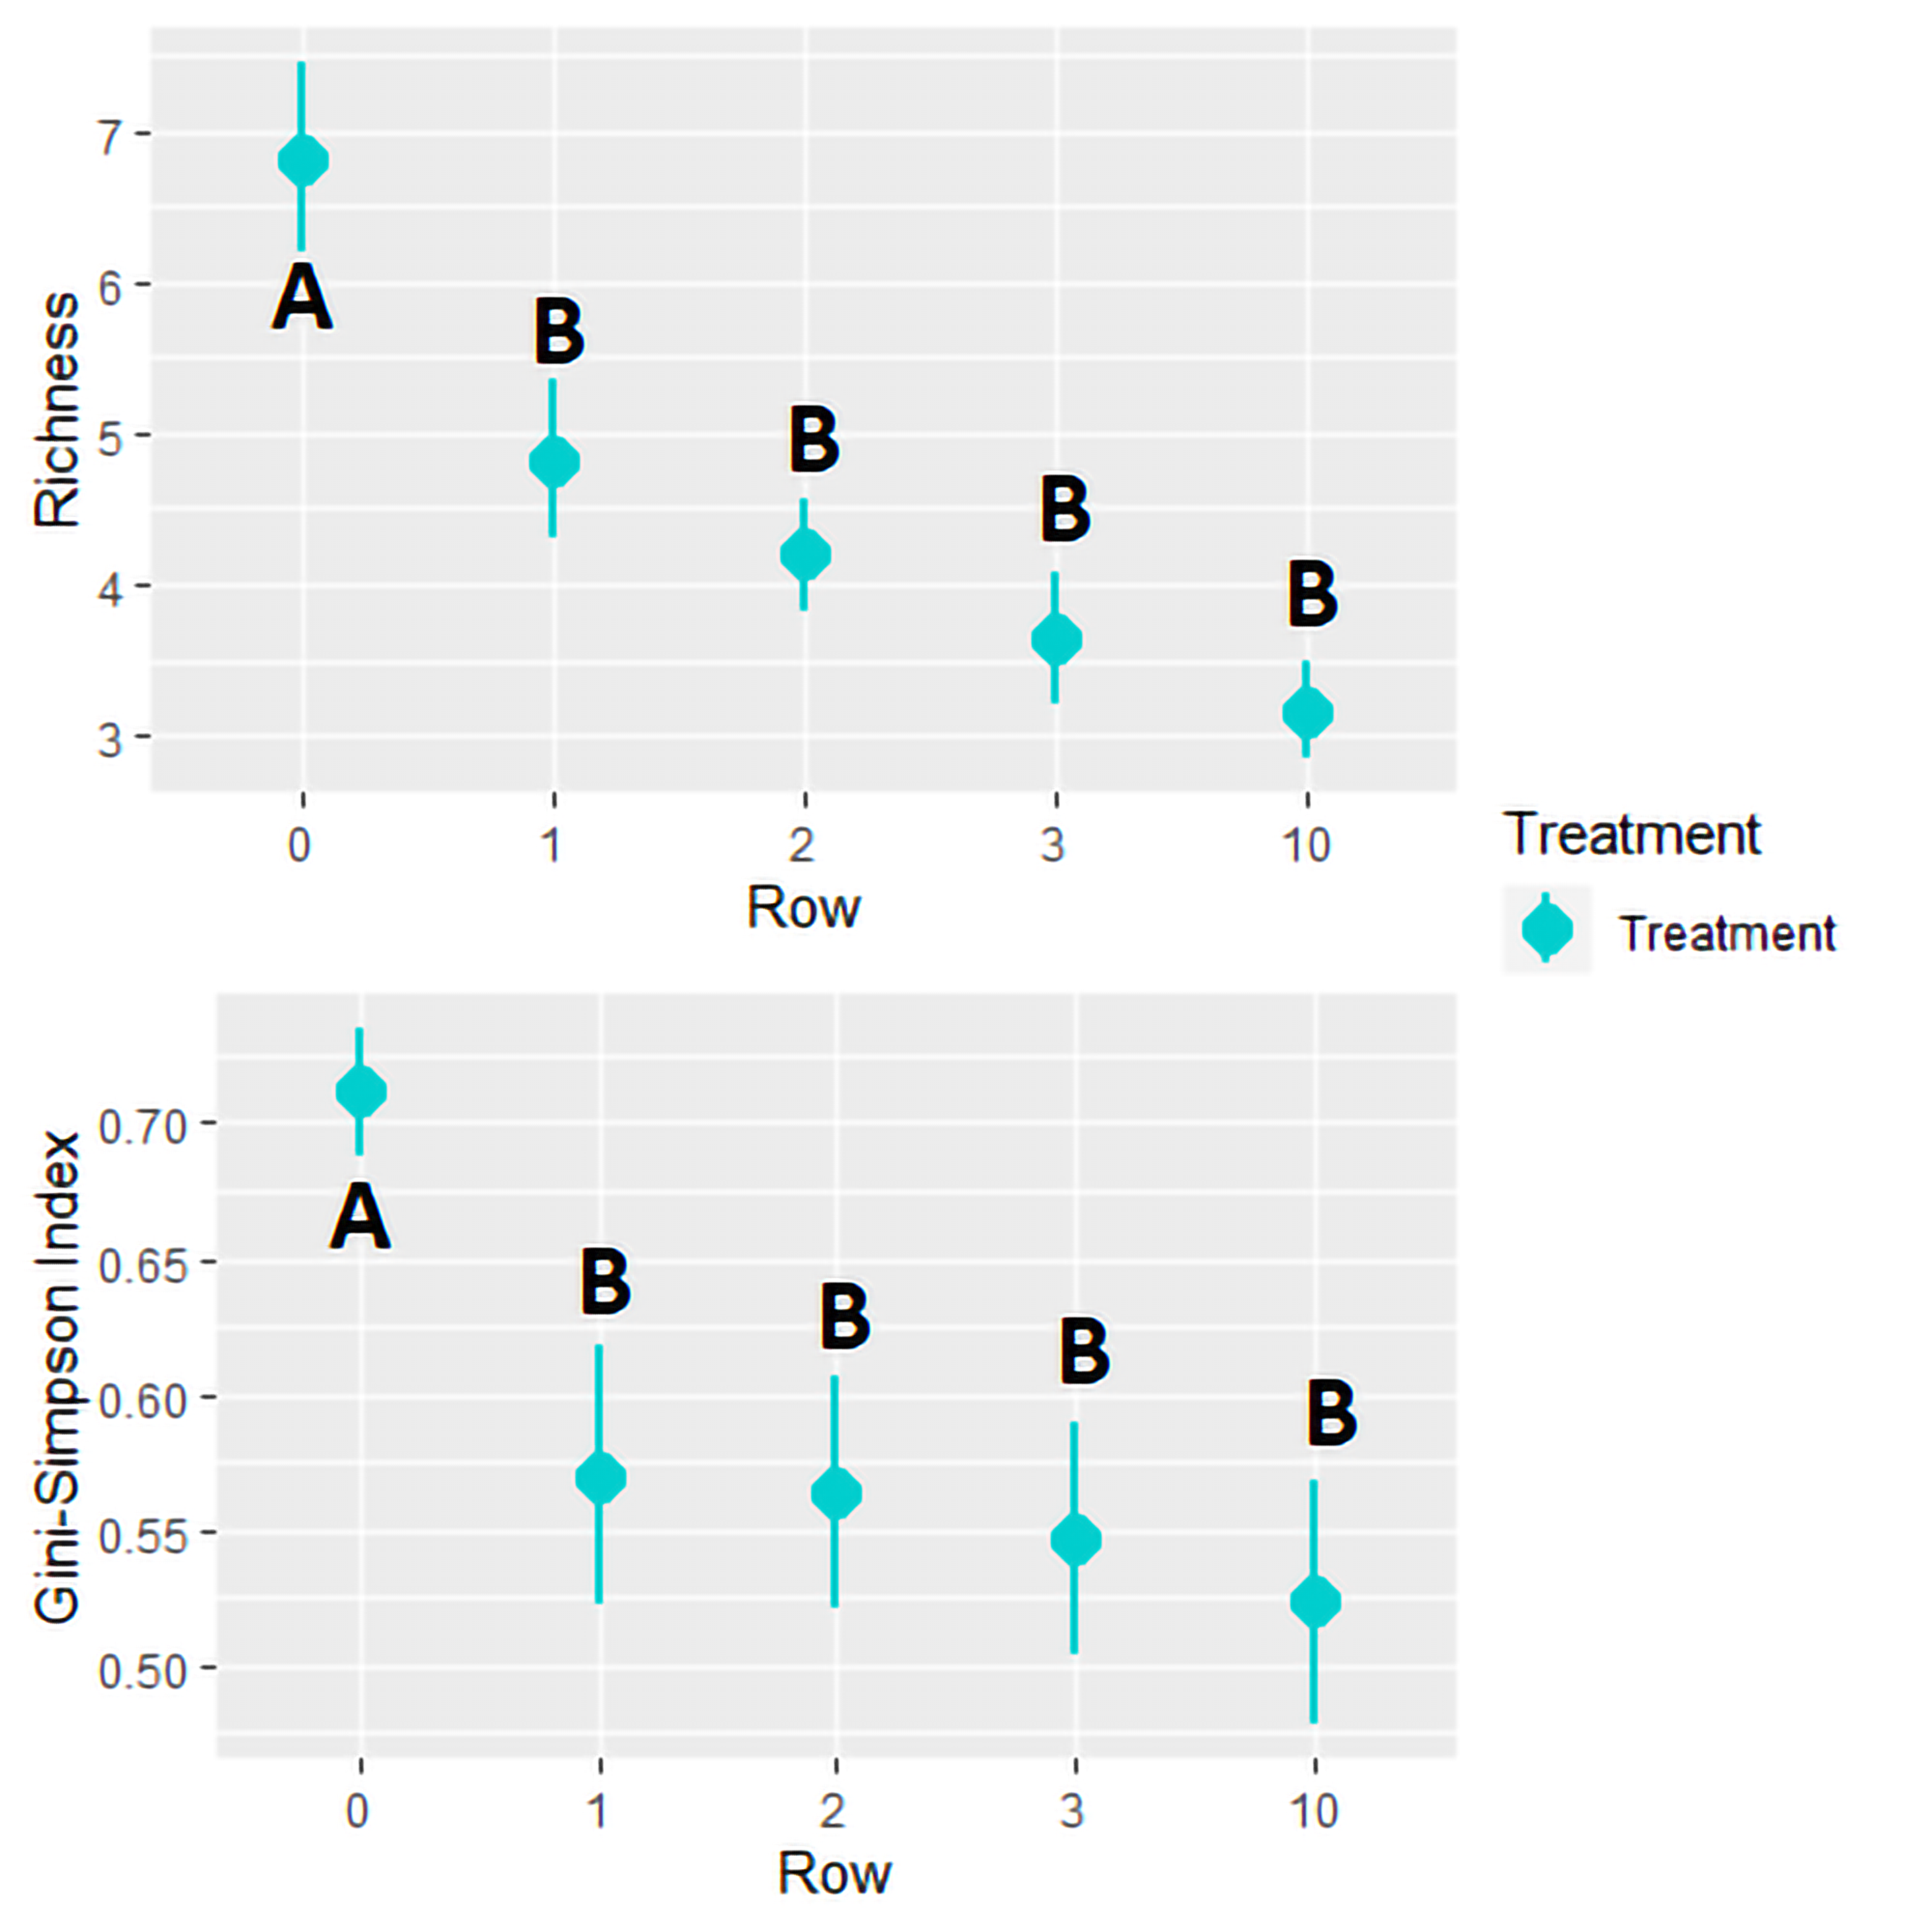 This figure depicts the effect of Row on species richness and Gini-Simpson Diversity within the treatment plot.